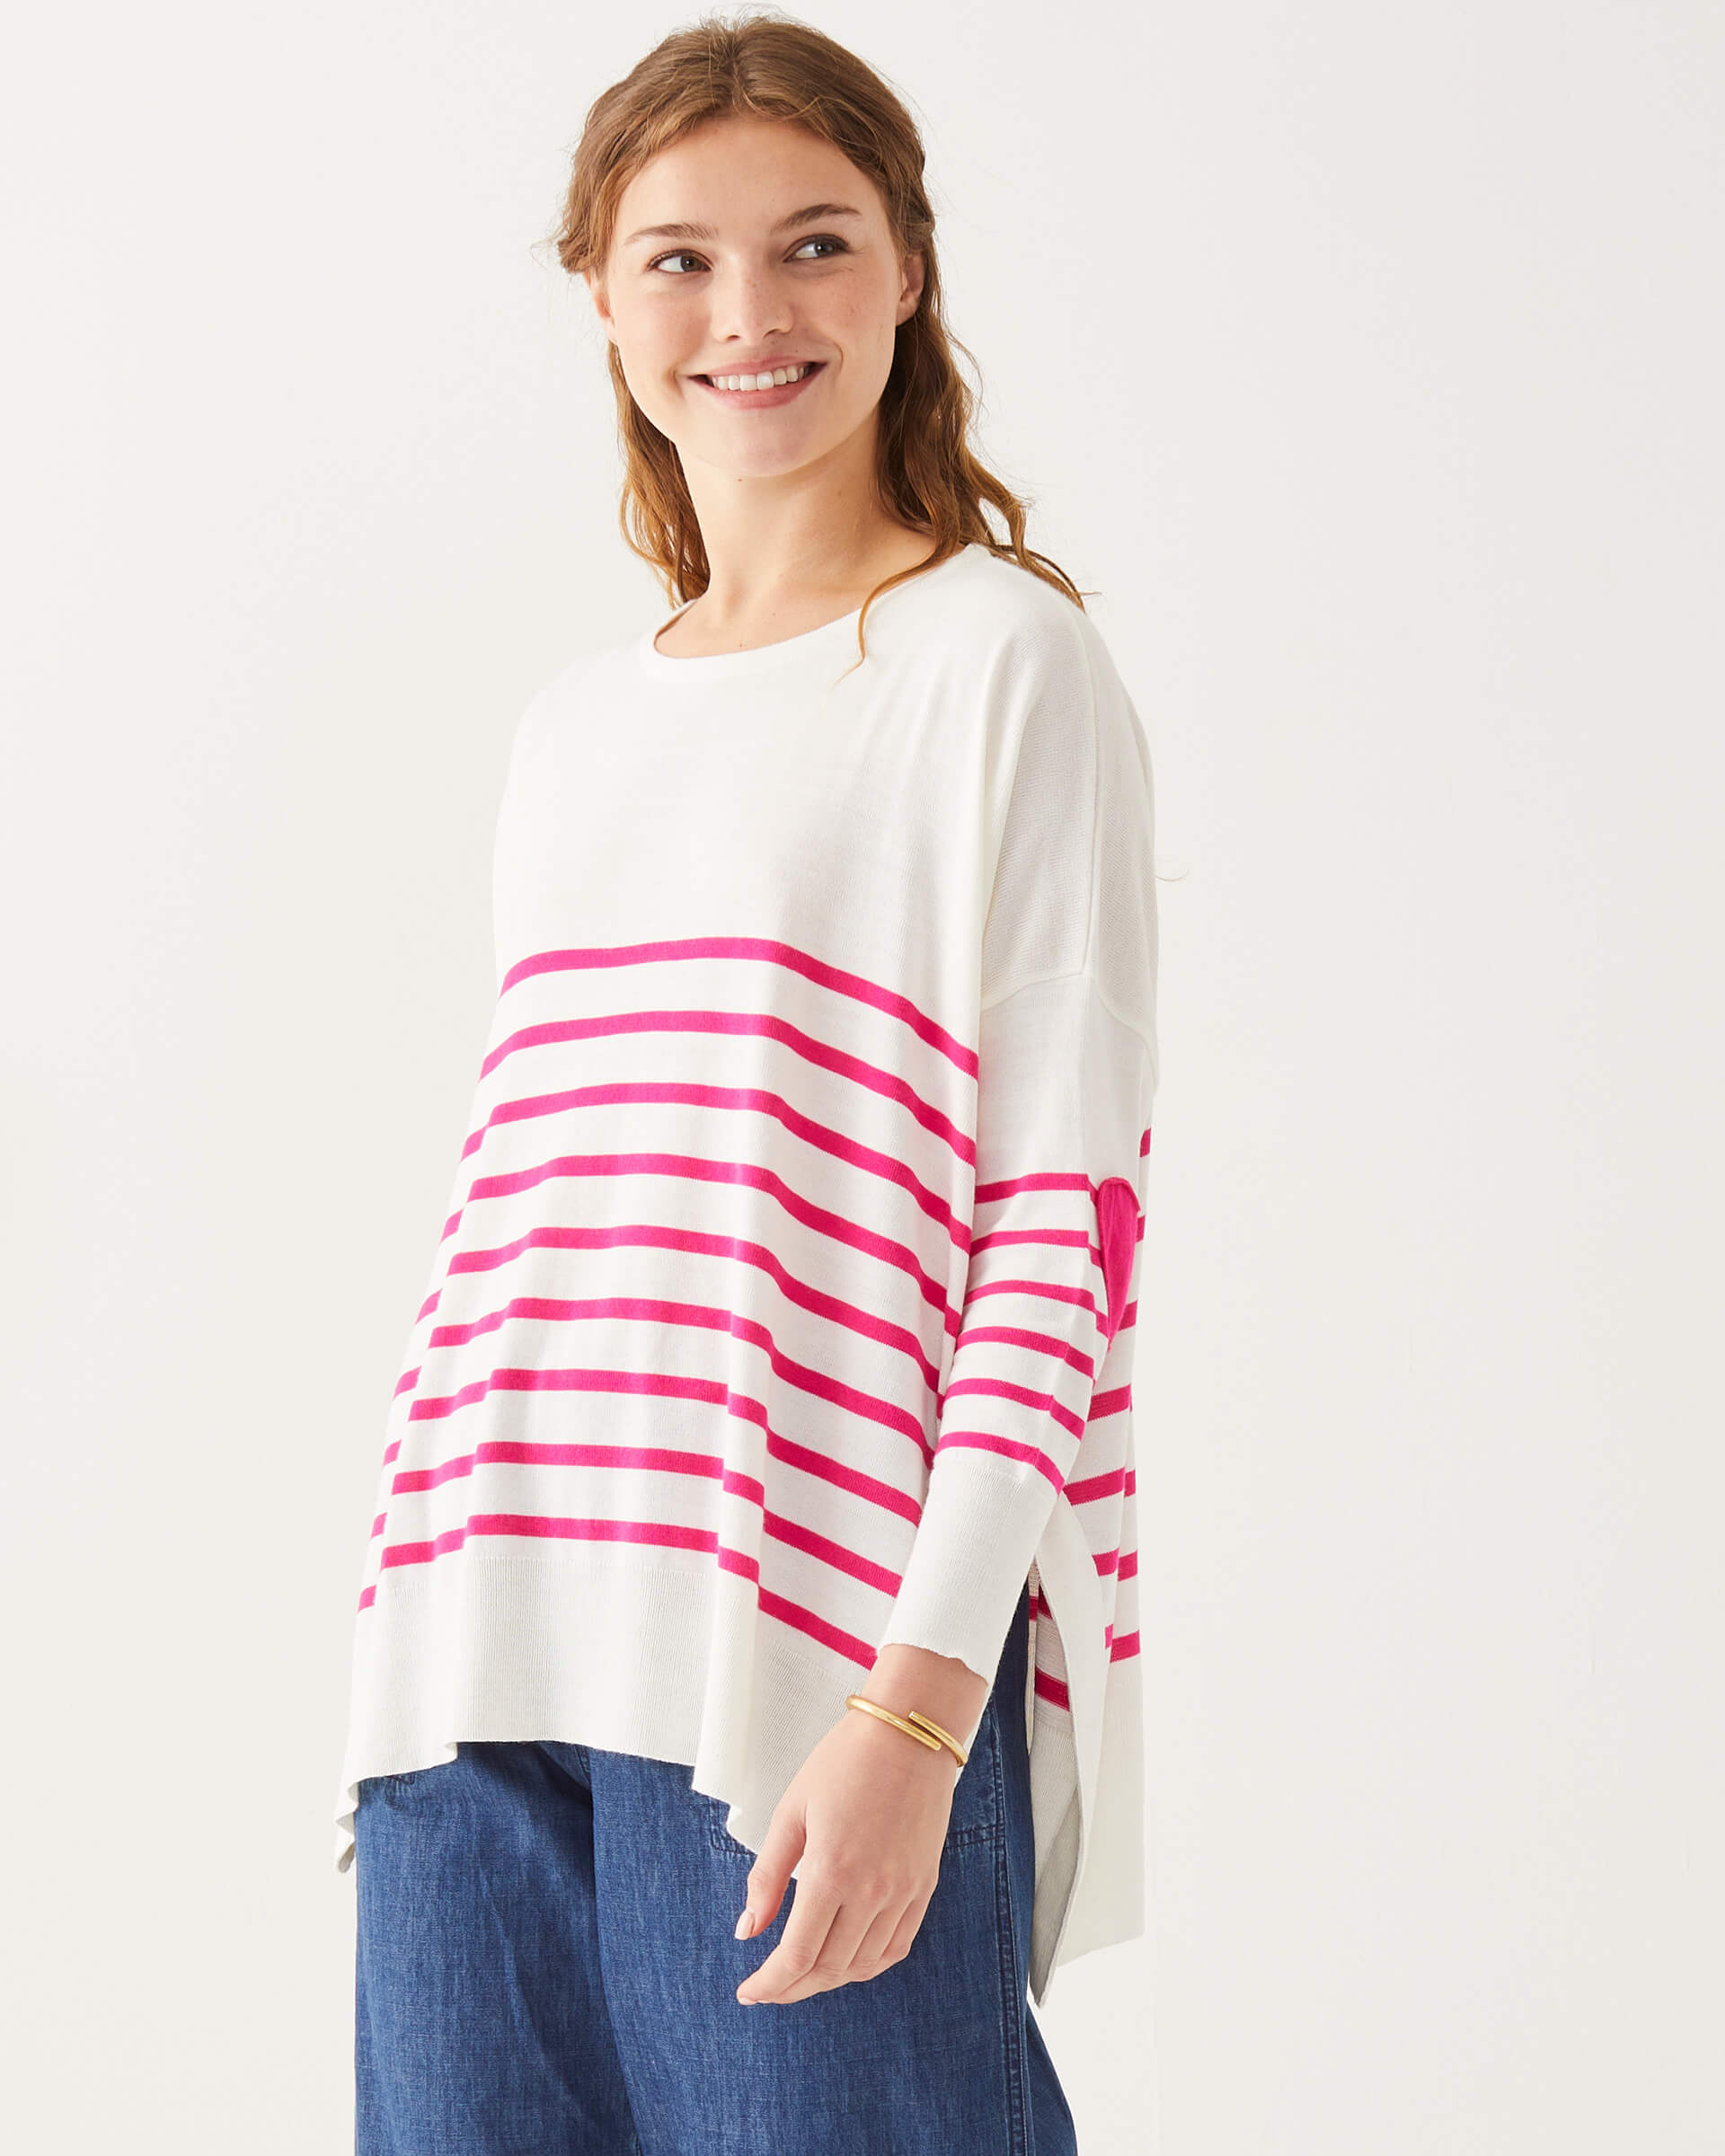 curly haired female wearing white and pink striped sweater standing on a white background 